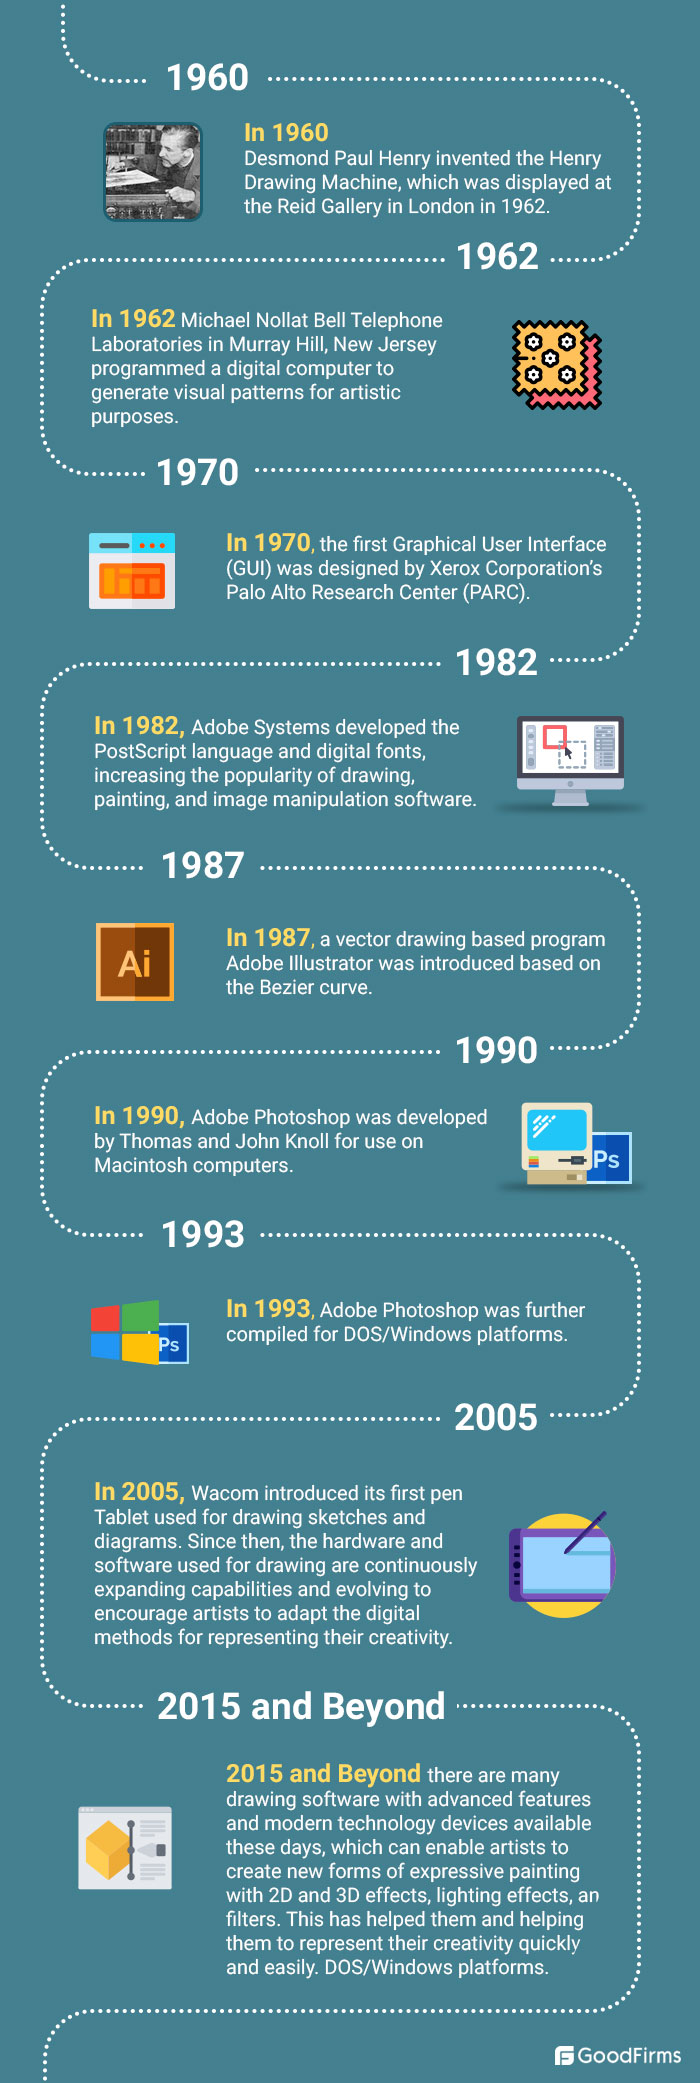 Evolution of Drawing Software